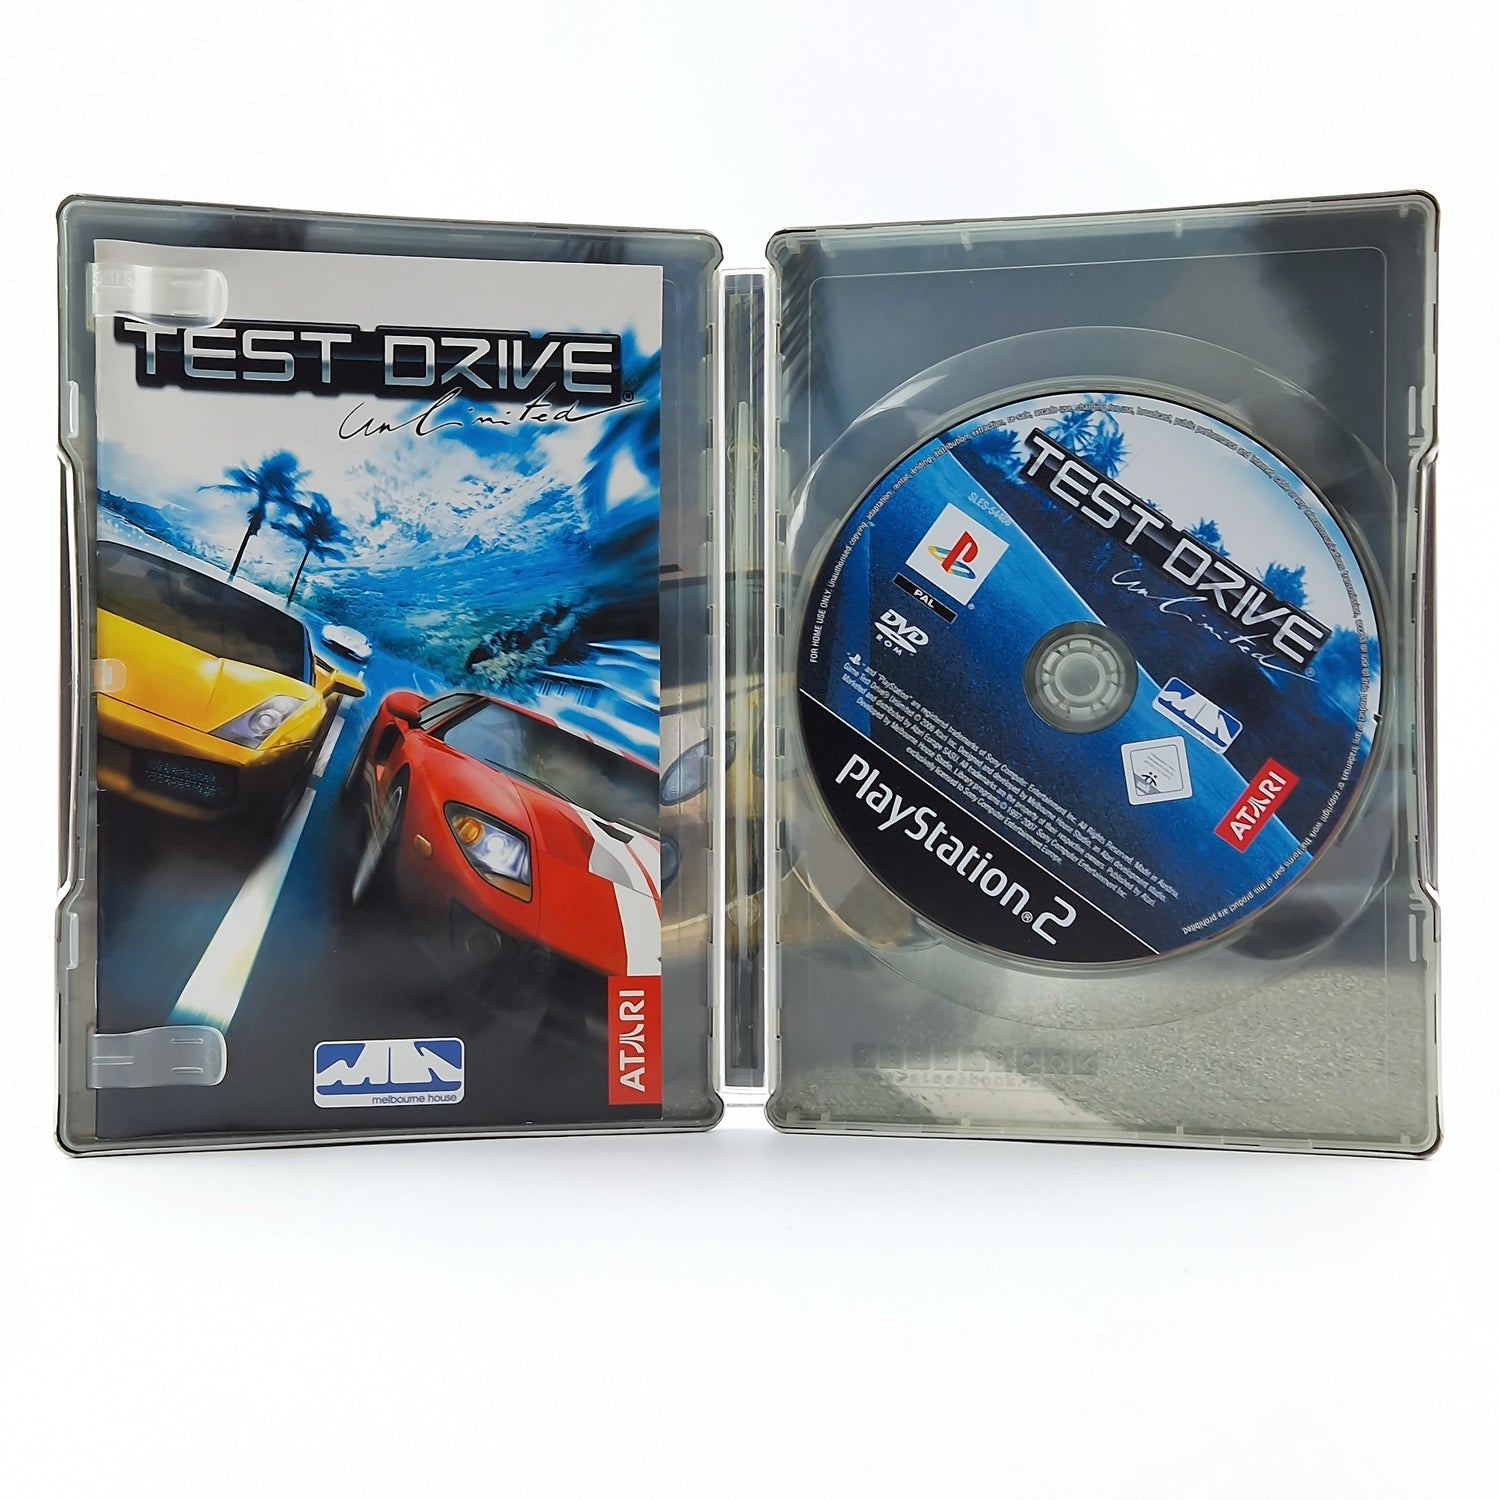 Playstation 2 Spiel : Test Drive Unlimited - OVP Anleitung CD PS2